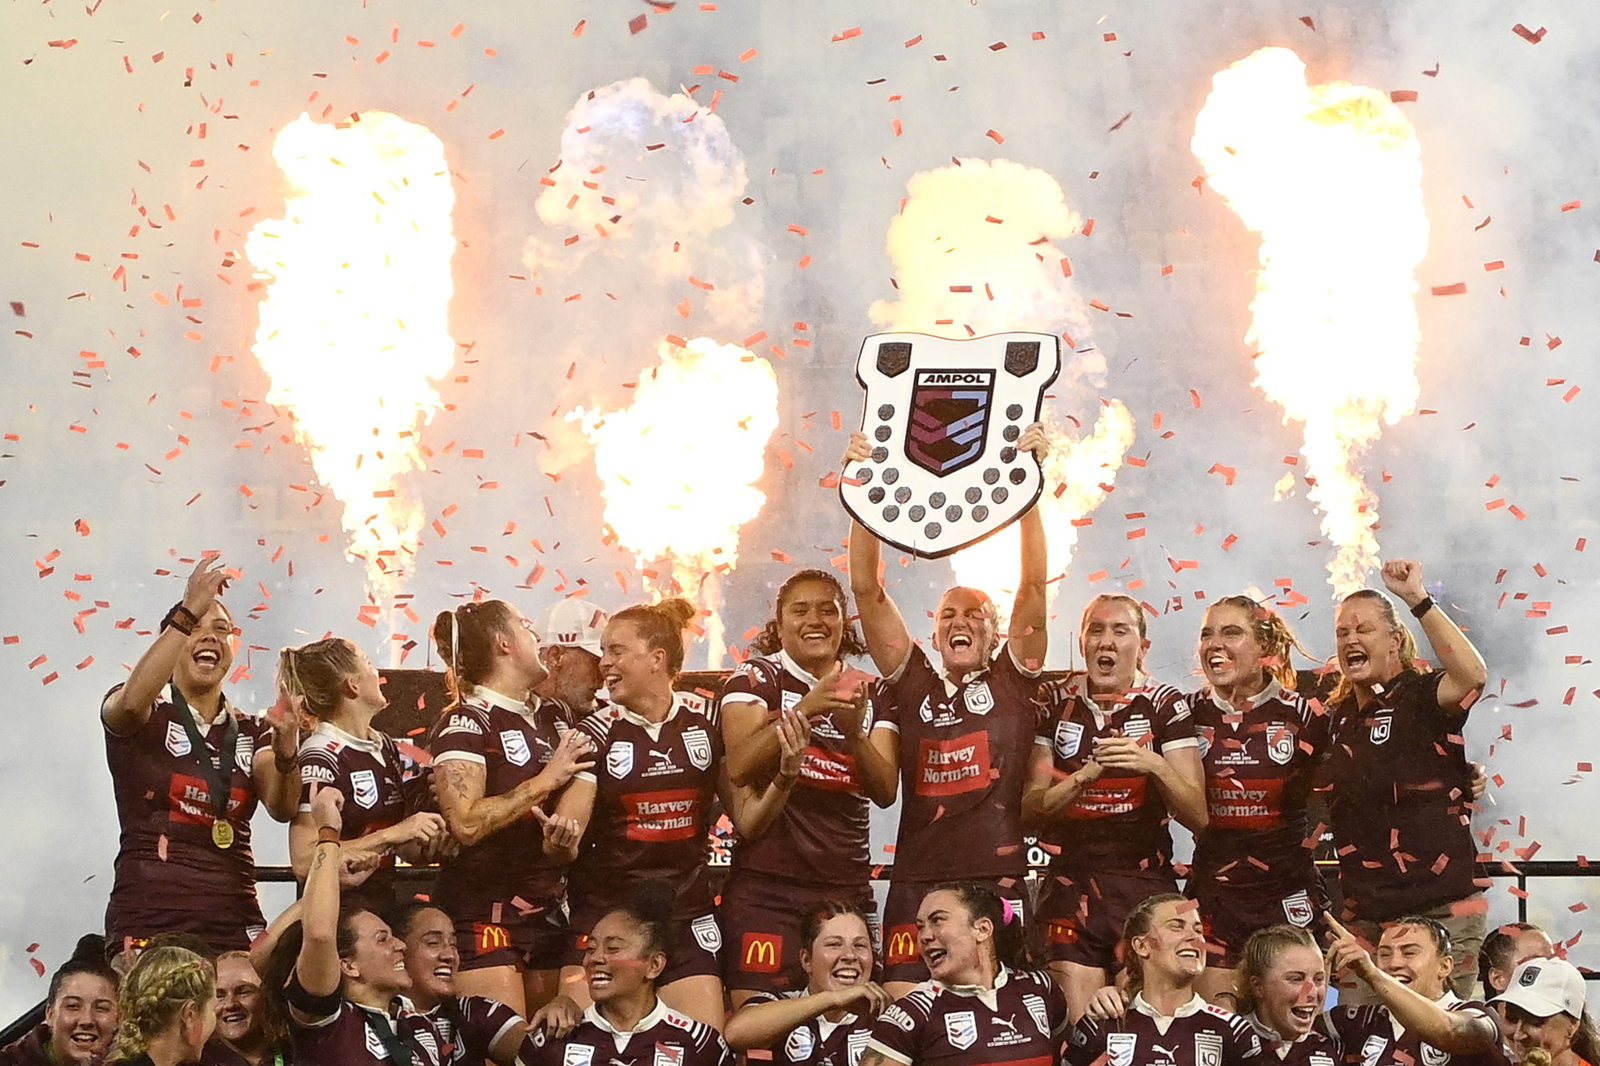 Queensland Maroons lift the Women's State of Origin shield as pyrotechnics go off.